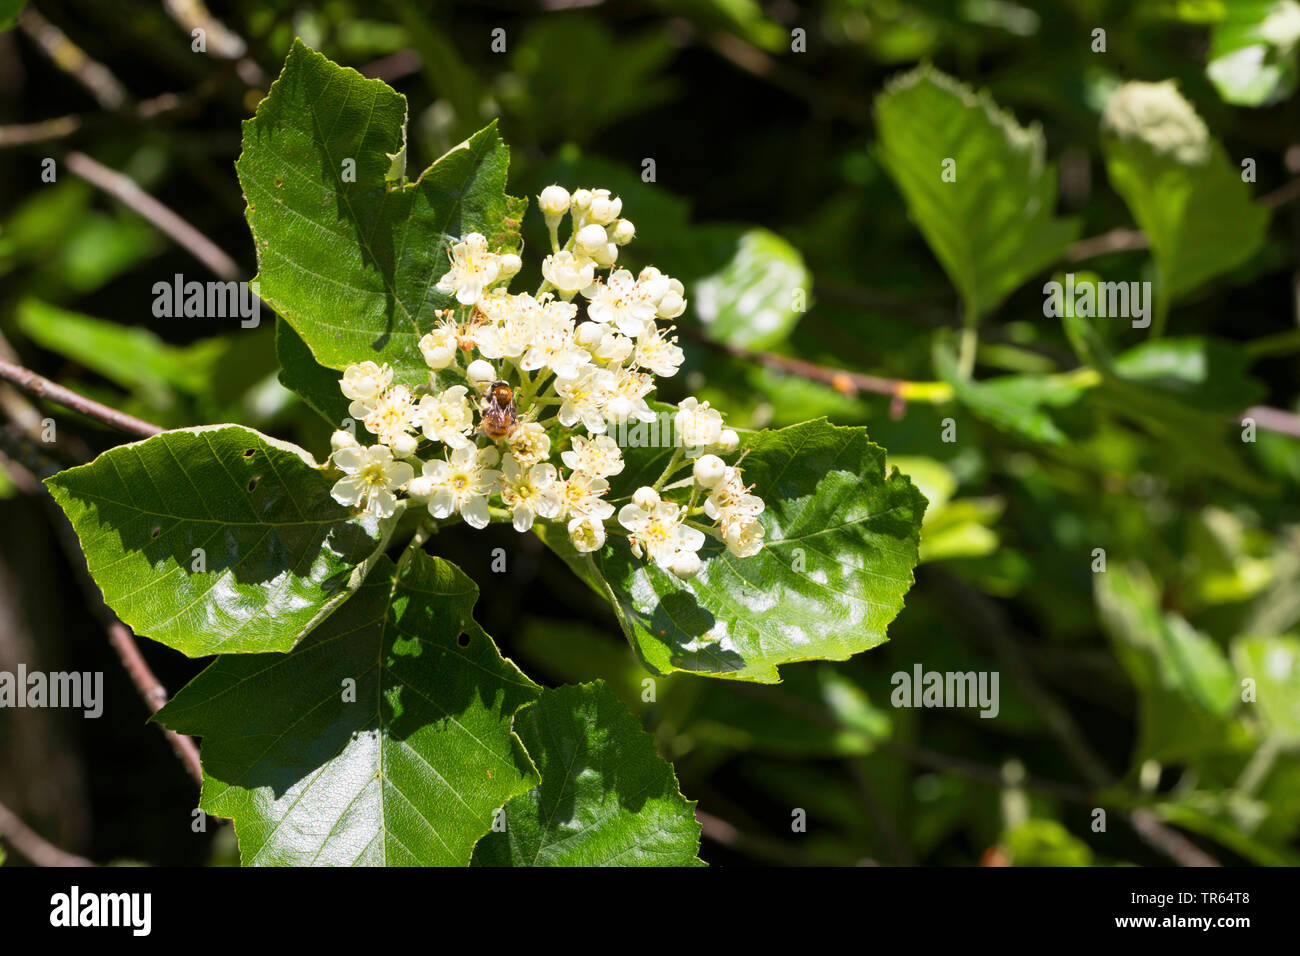 broad-leaved whitebeam, service tree of Fontainebleau (Sorbus latifolia), blooming branch Stock Photo